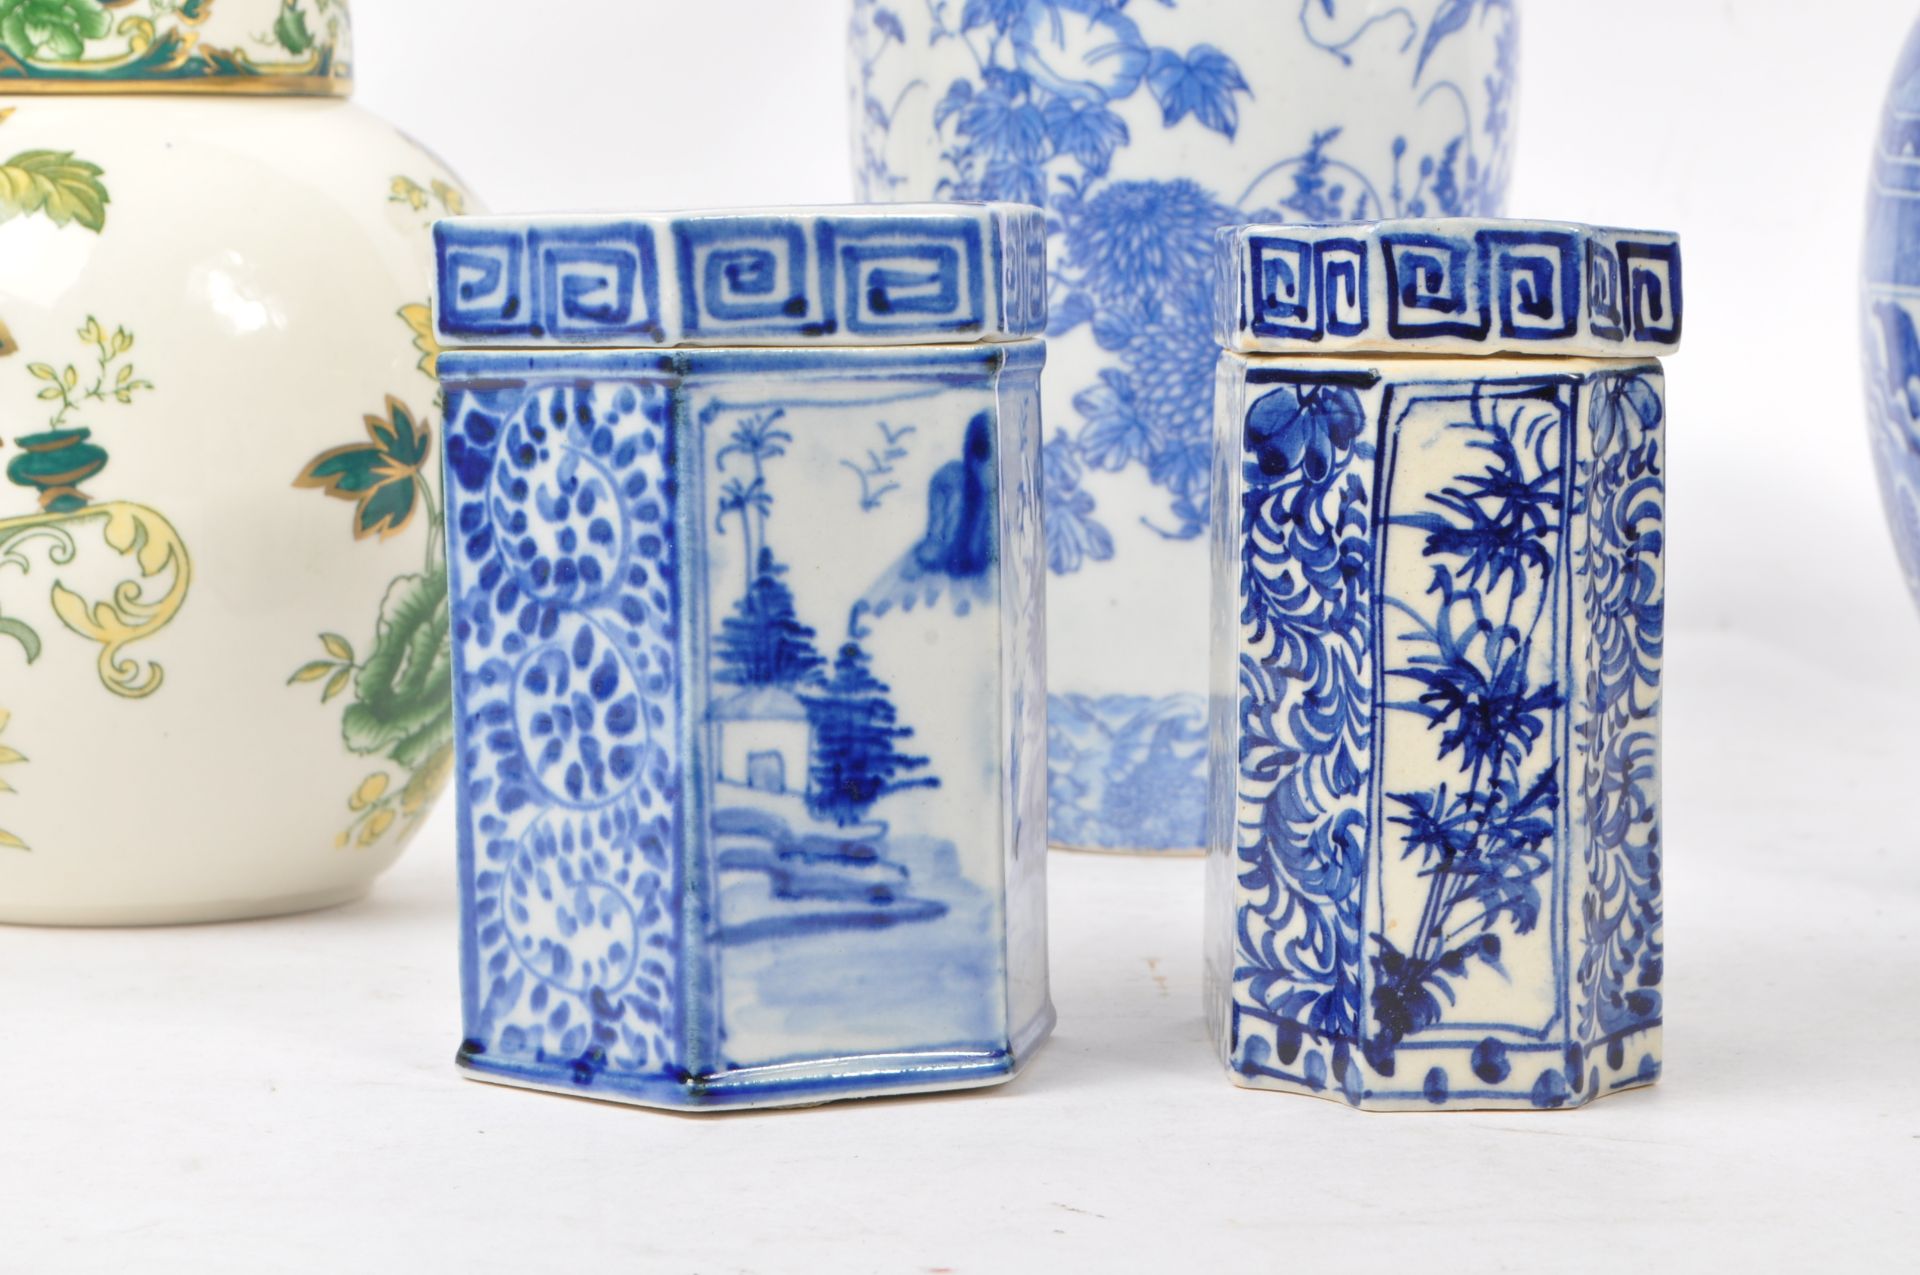 MASON'S - COLLECTION OF BRITISH AND CHINESE PORCELAIN ITEMS - Image 3 of 10